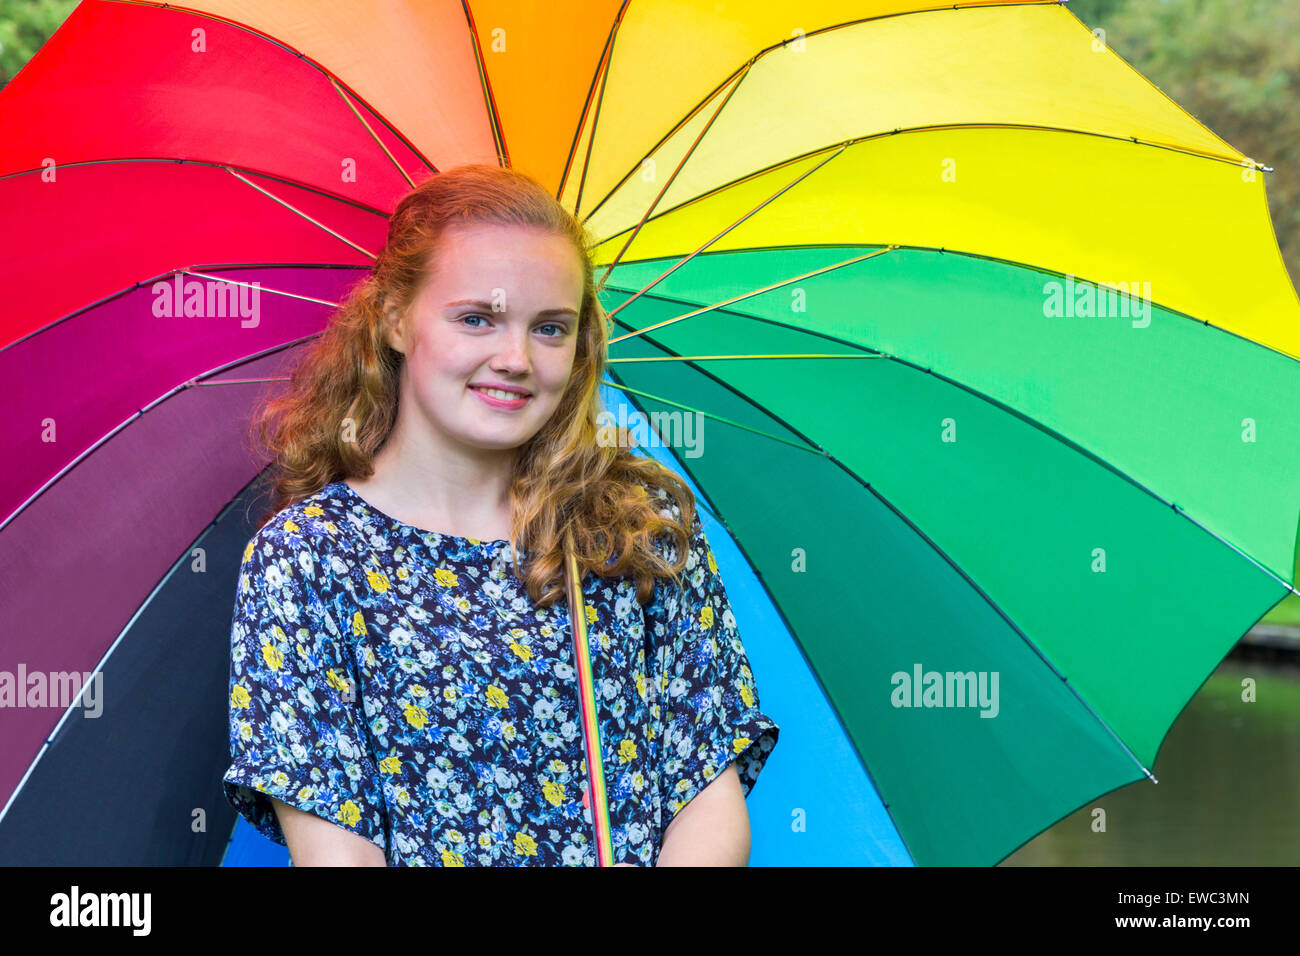 Caucasian teenage girl outdoors under umbrella with various colors Stock Photo